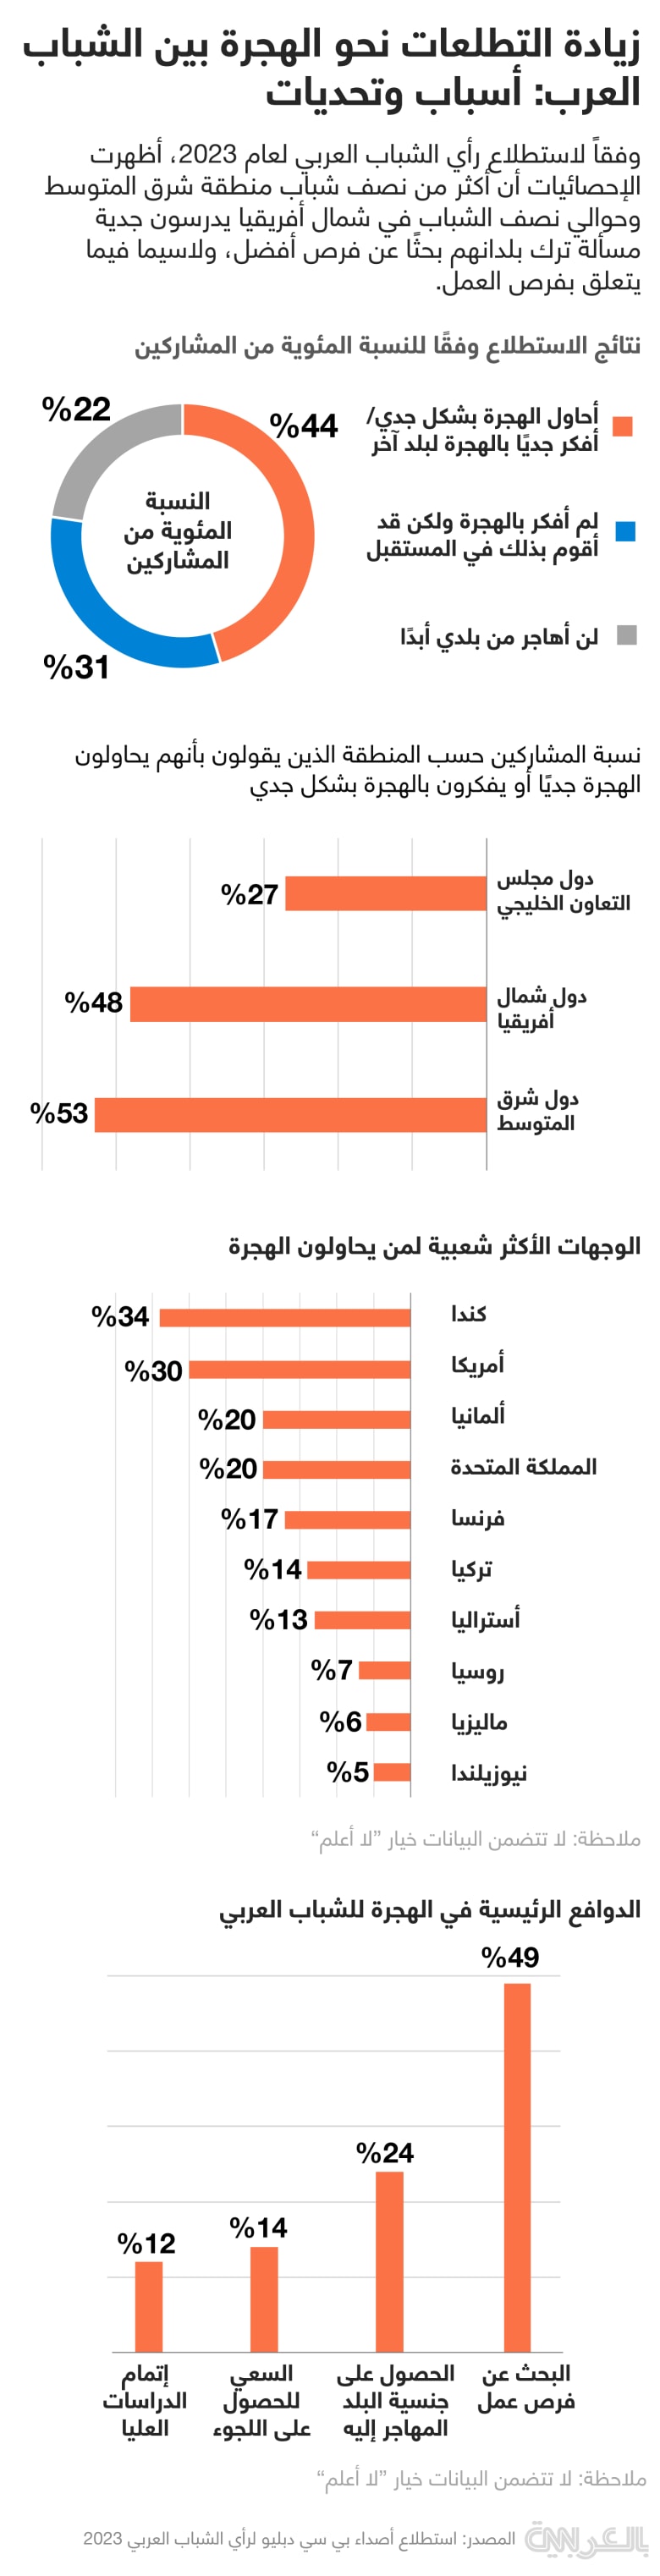 arab-youth-survery2023-immigration